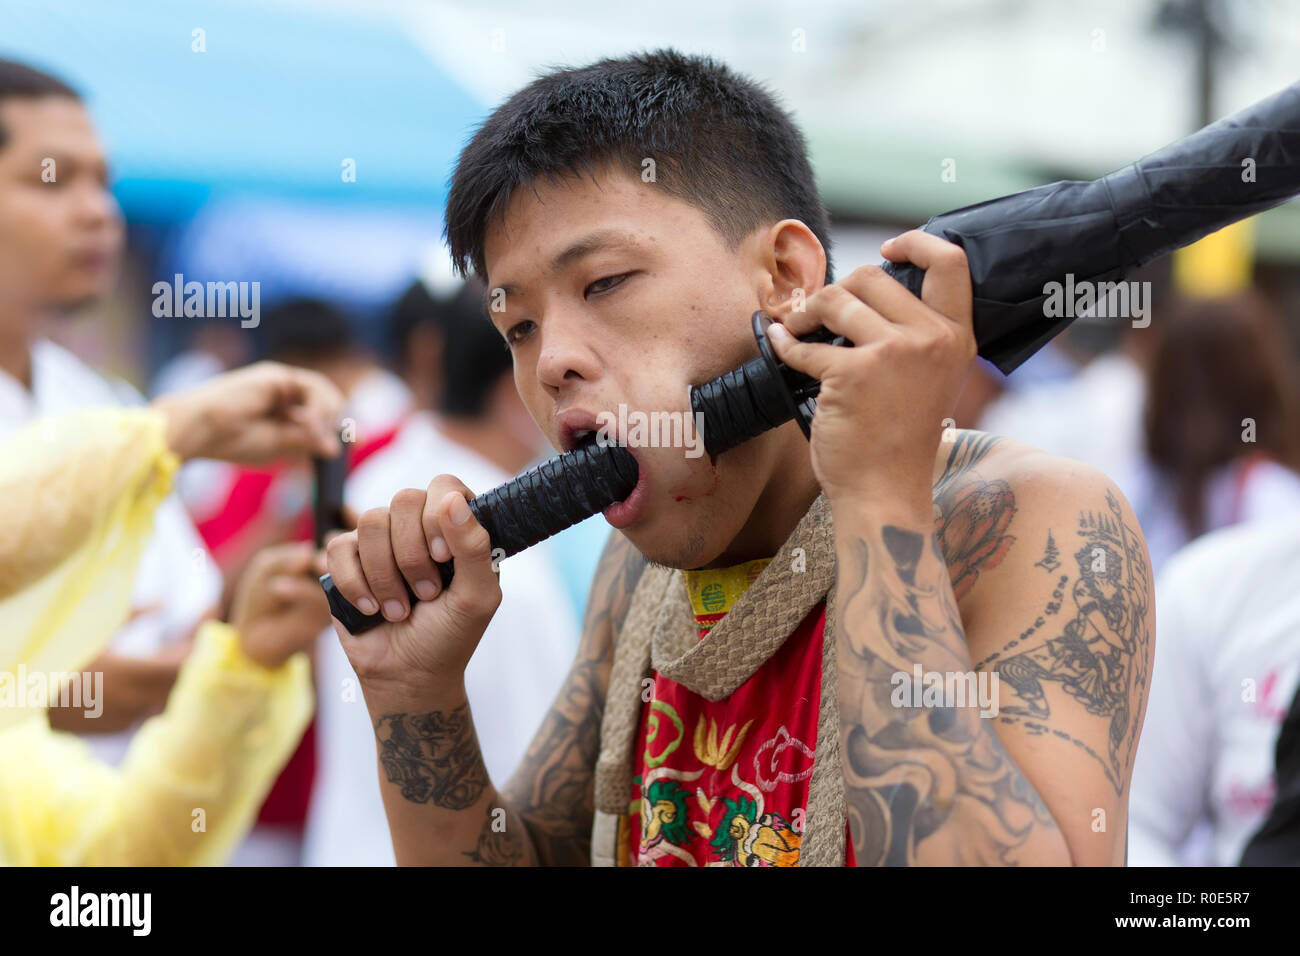 Phuket Town, THAILAND, October 06, 2016 : Devotee extreme piercing street procession during the Taoist vegetarian festival of the Nine Emperor Gods in Stock Photo